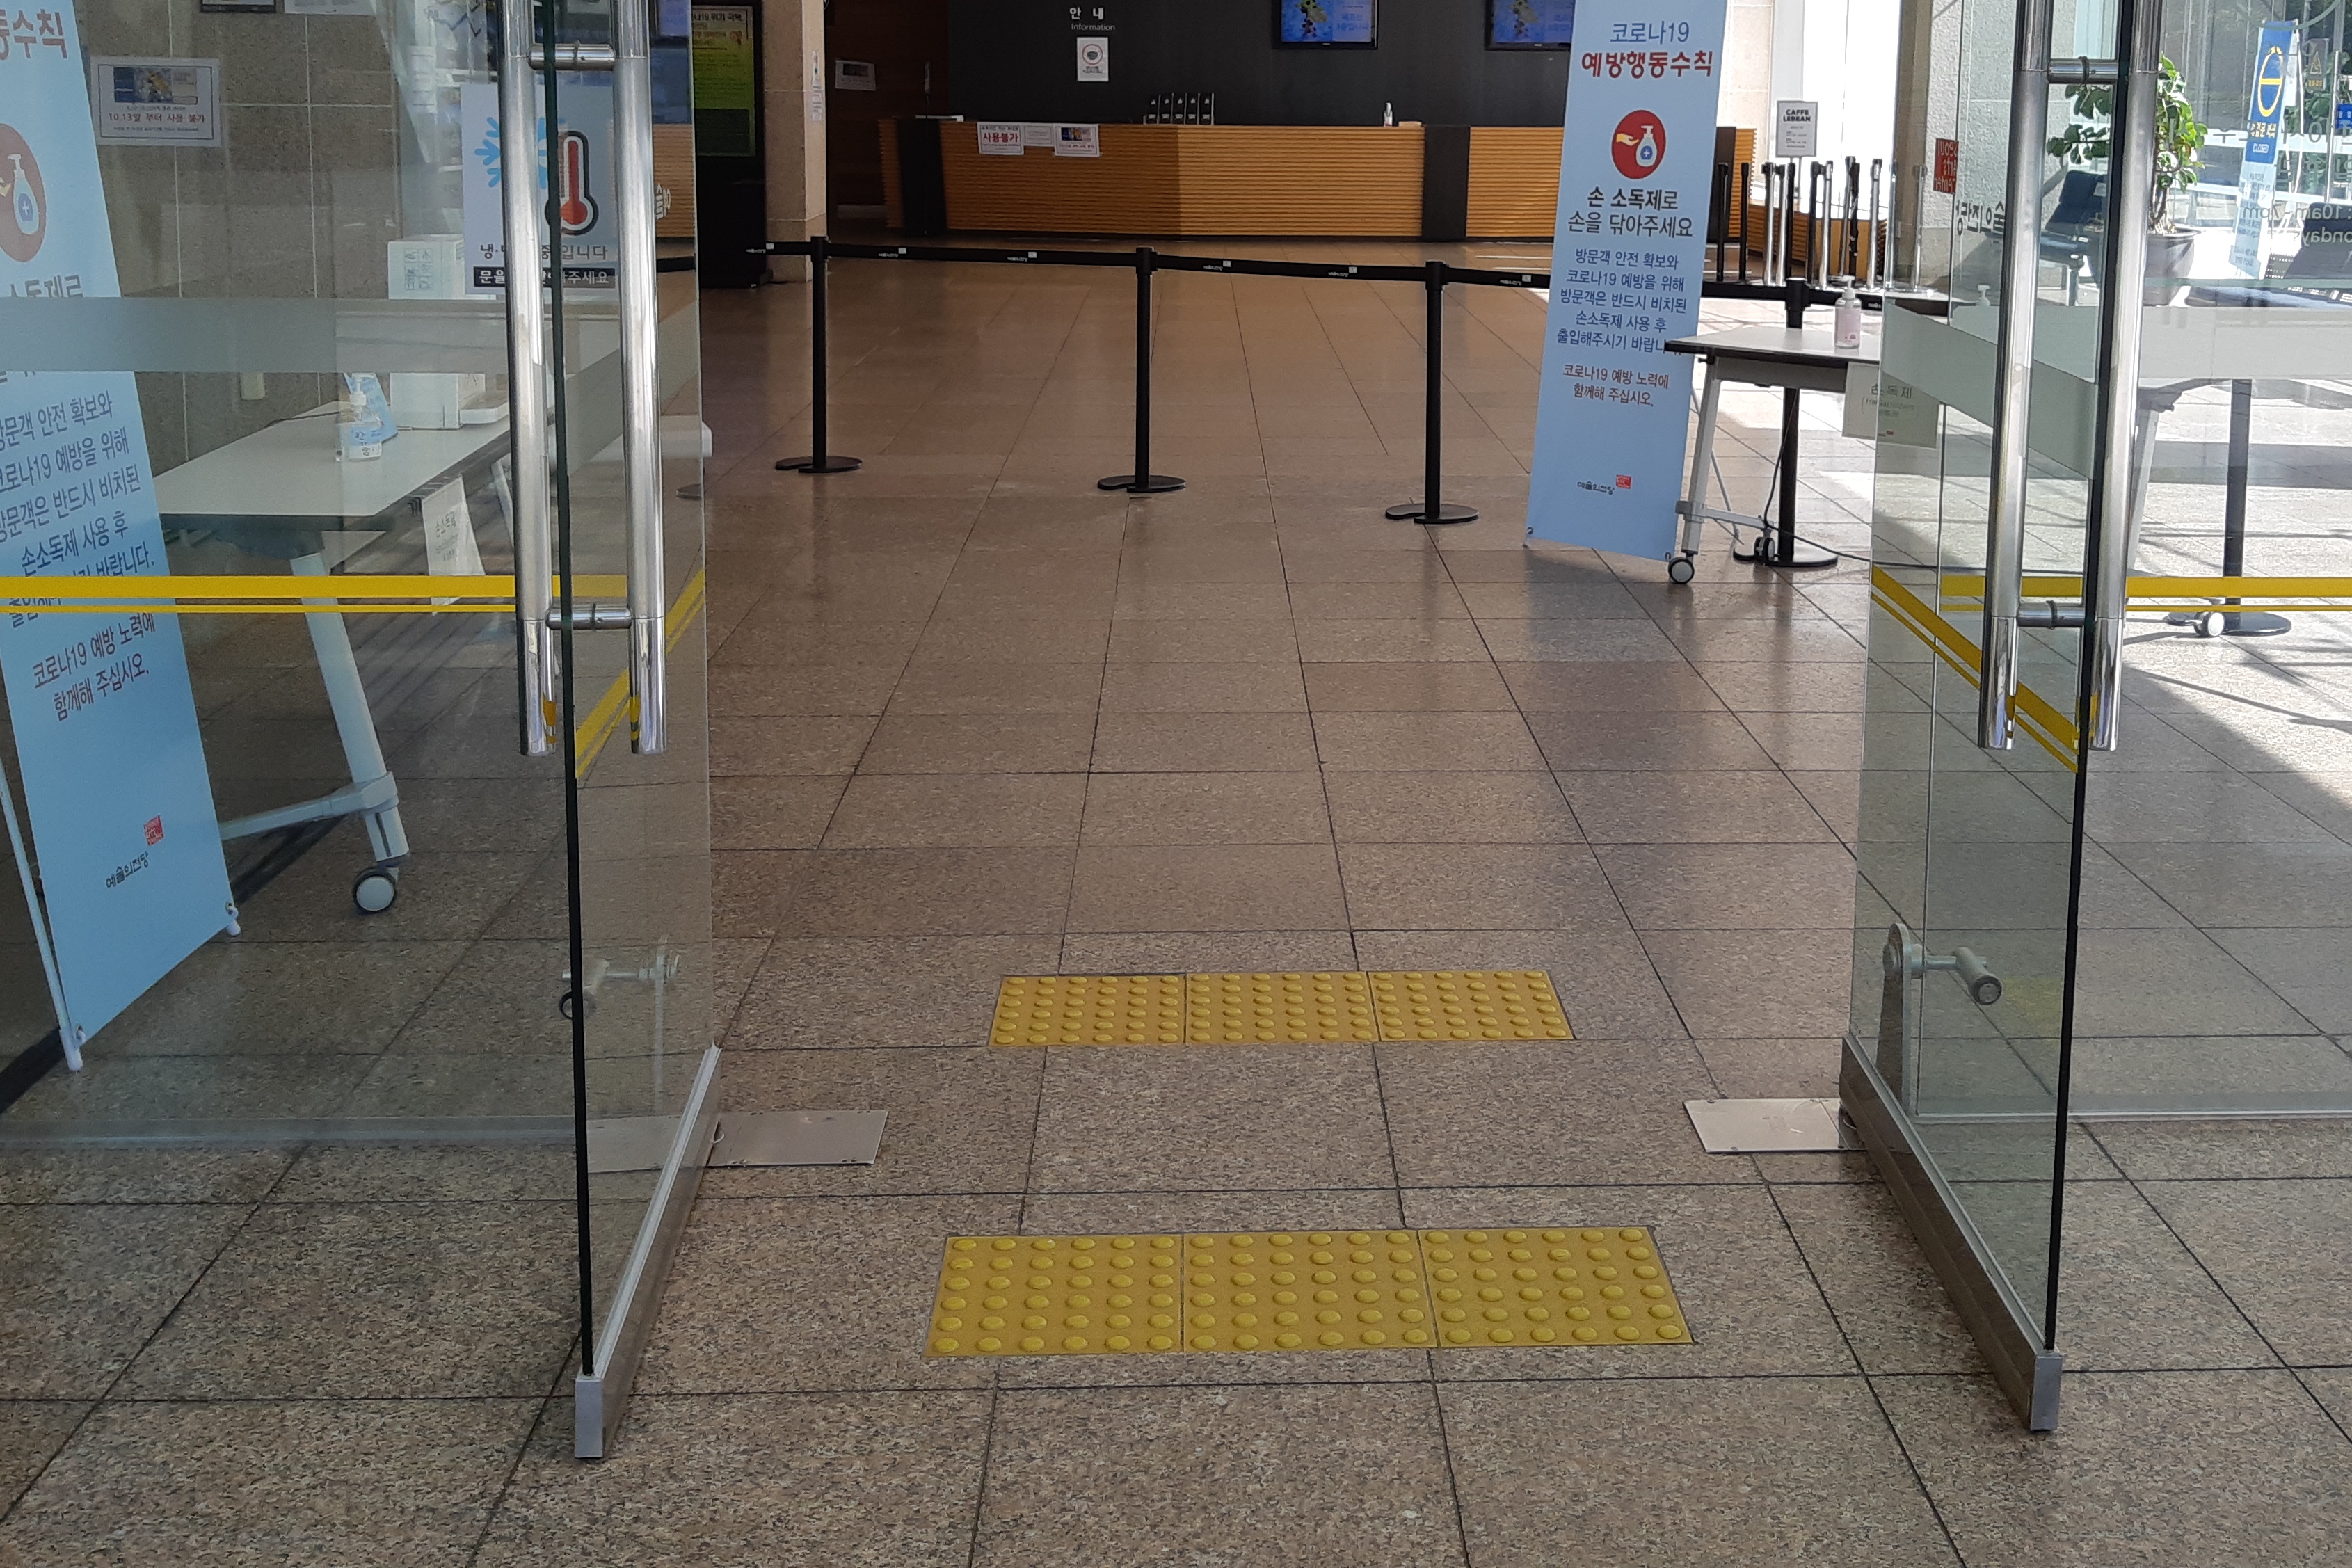 Entryway/ Main entrance0 : Flat and wide main entrance with tactile paving for persons with visual impairment 